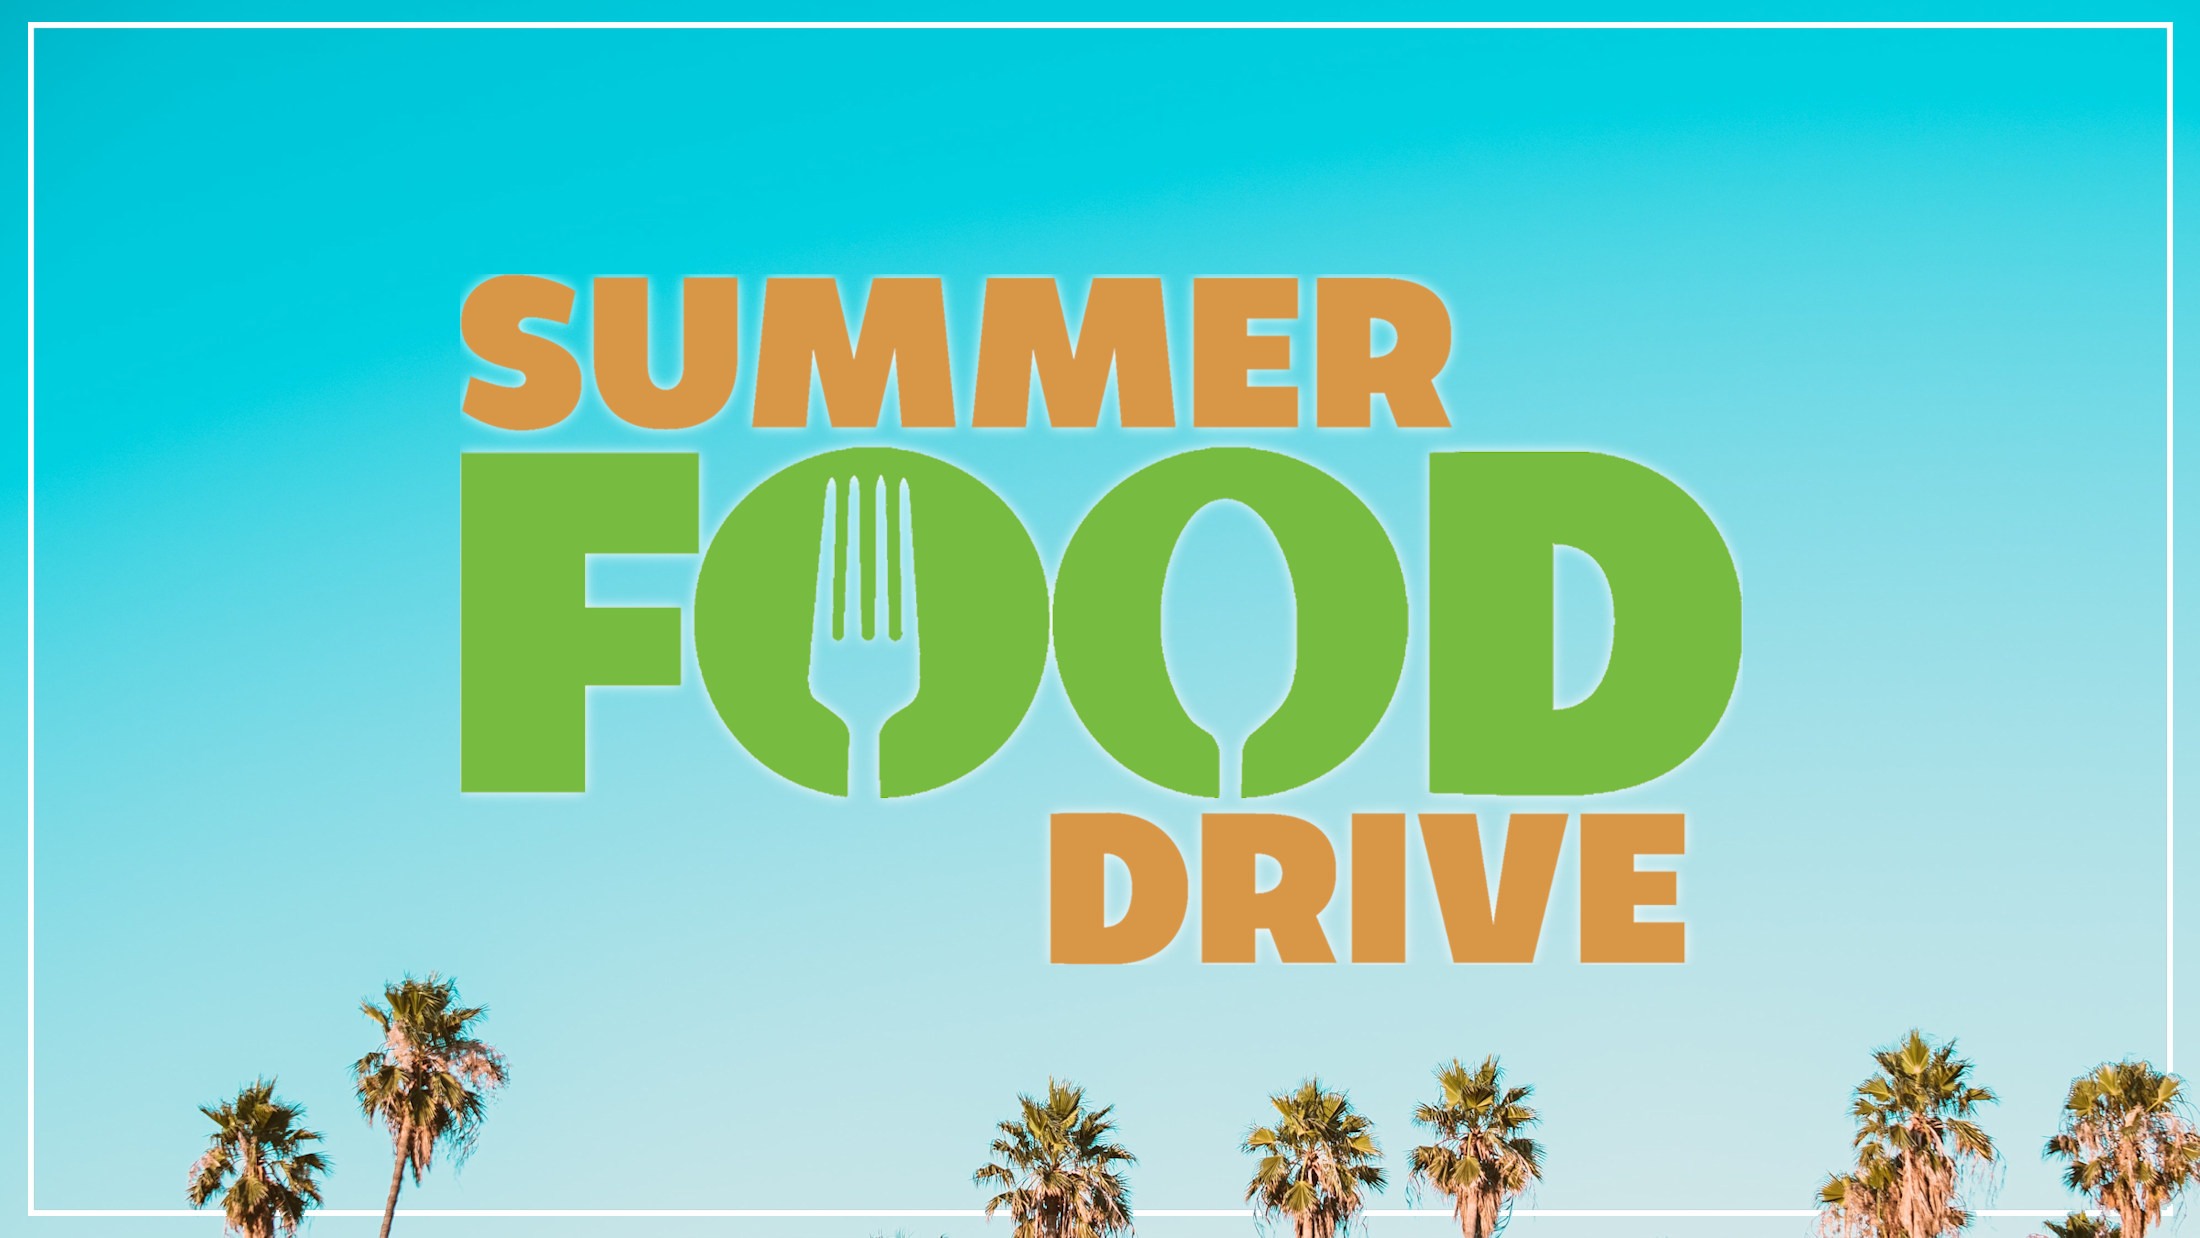 You are currently viewing Community’s Child Summer Food Drive